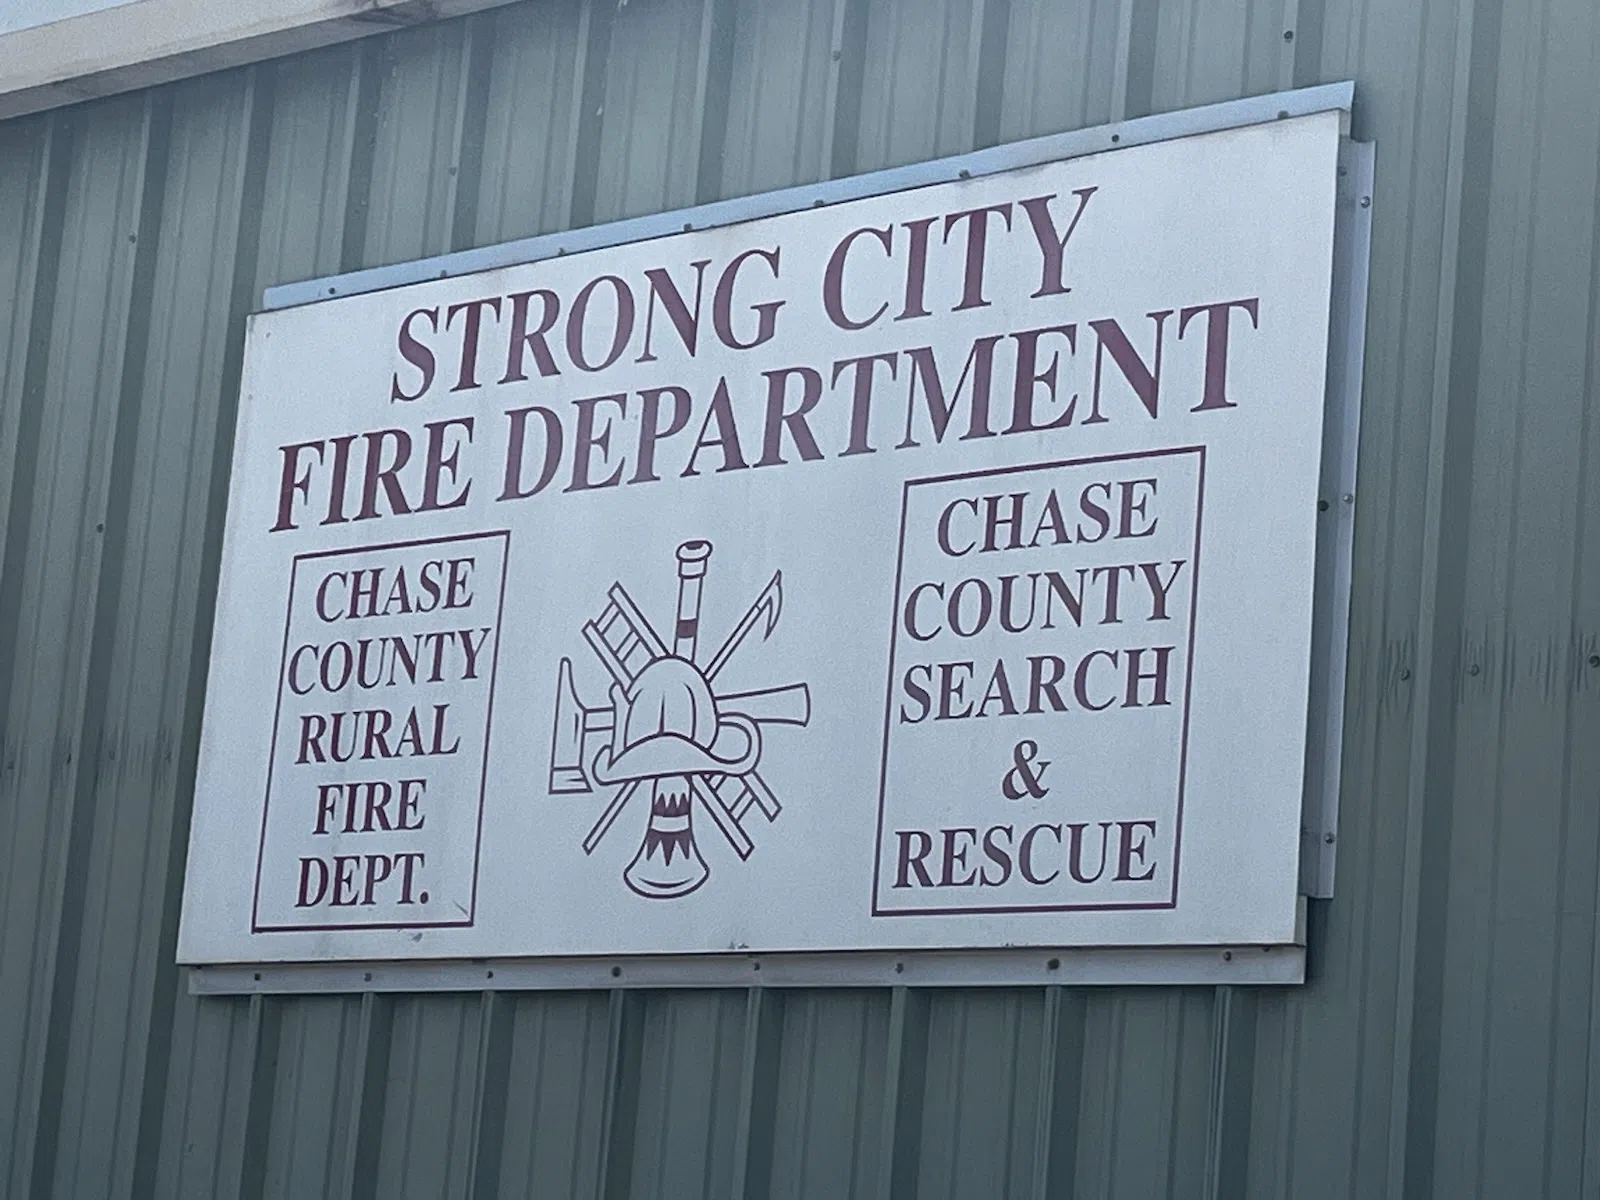 Chase County Commission approves application for CDBG grant to assist with construction of new fire department HQ